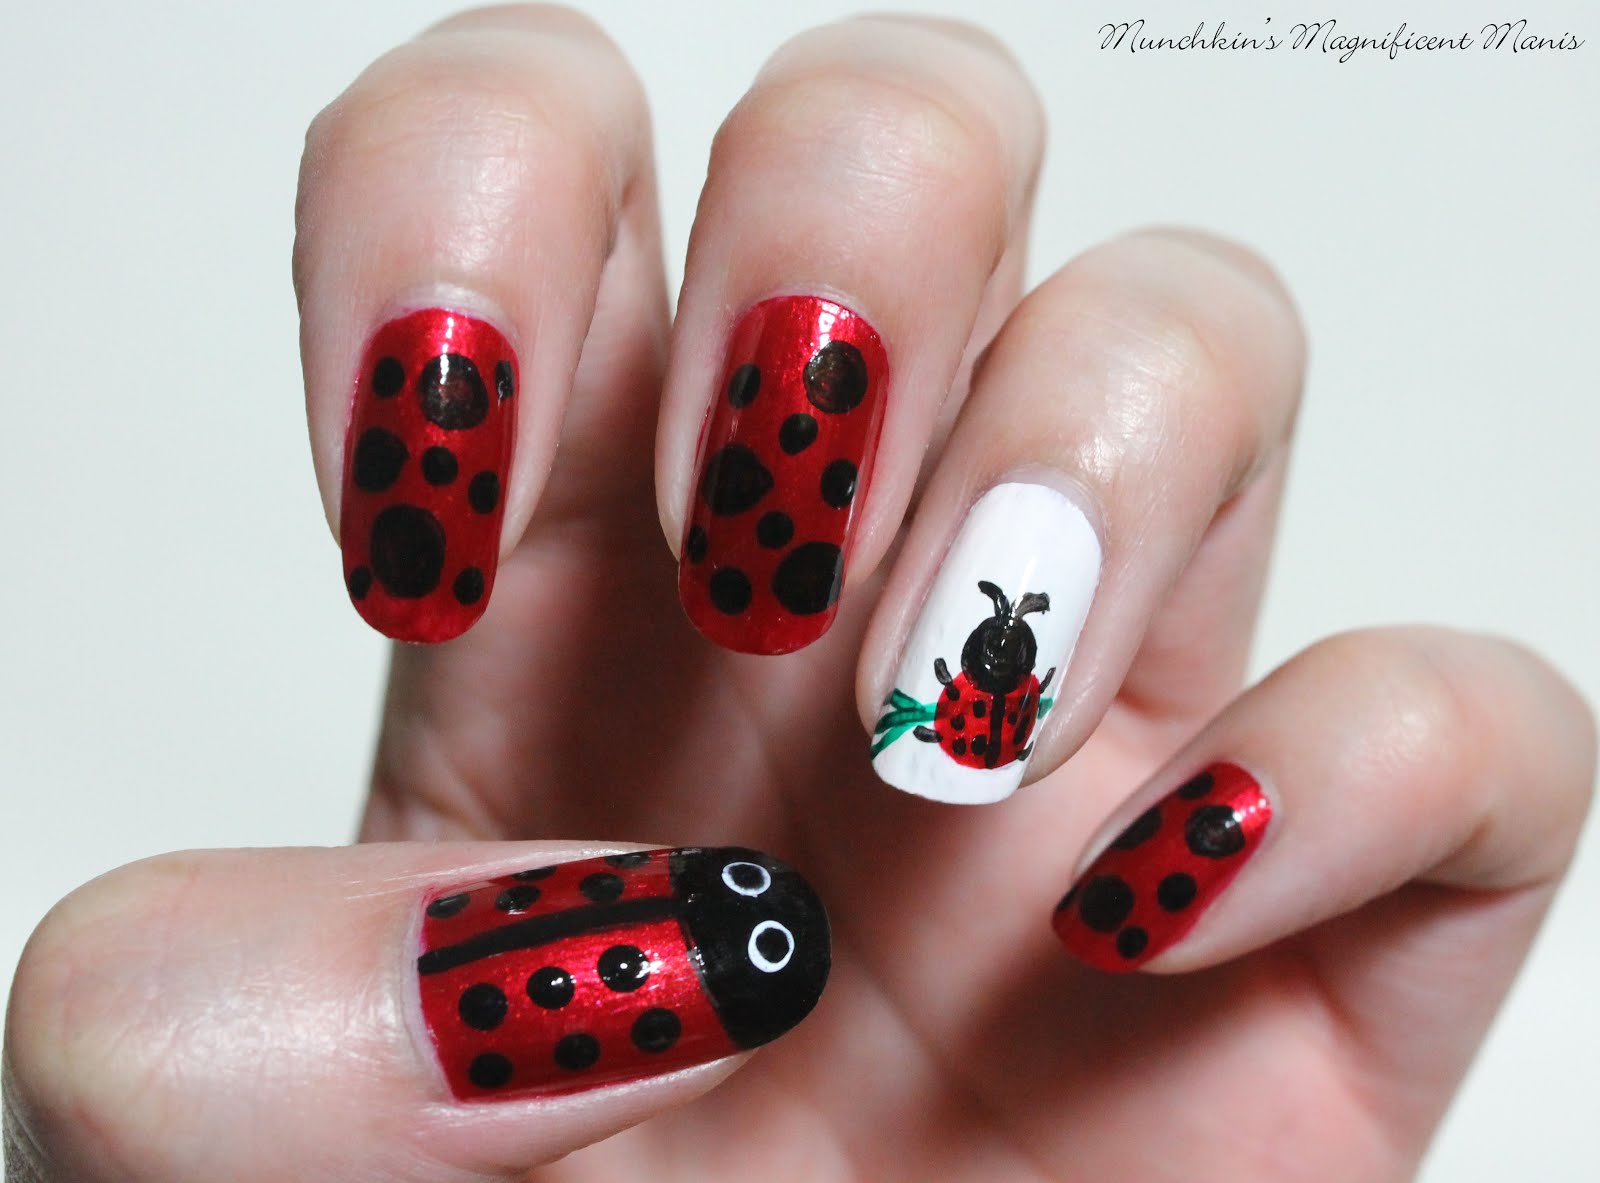 Munchkin’s Magnificent Manis: Act Like a Lady- Ladybug Nail Design